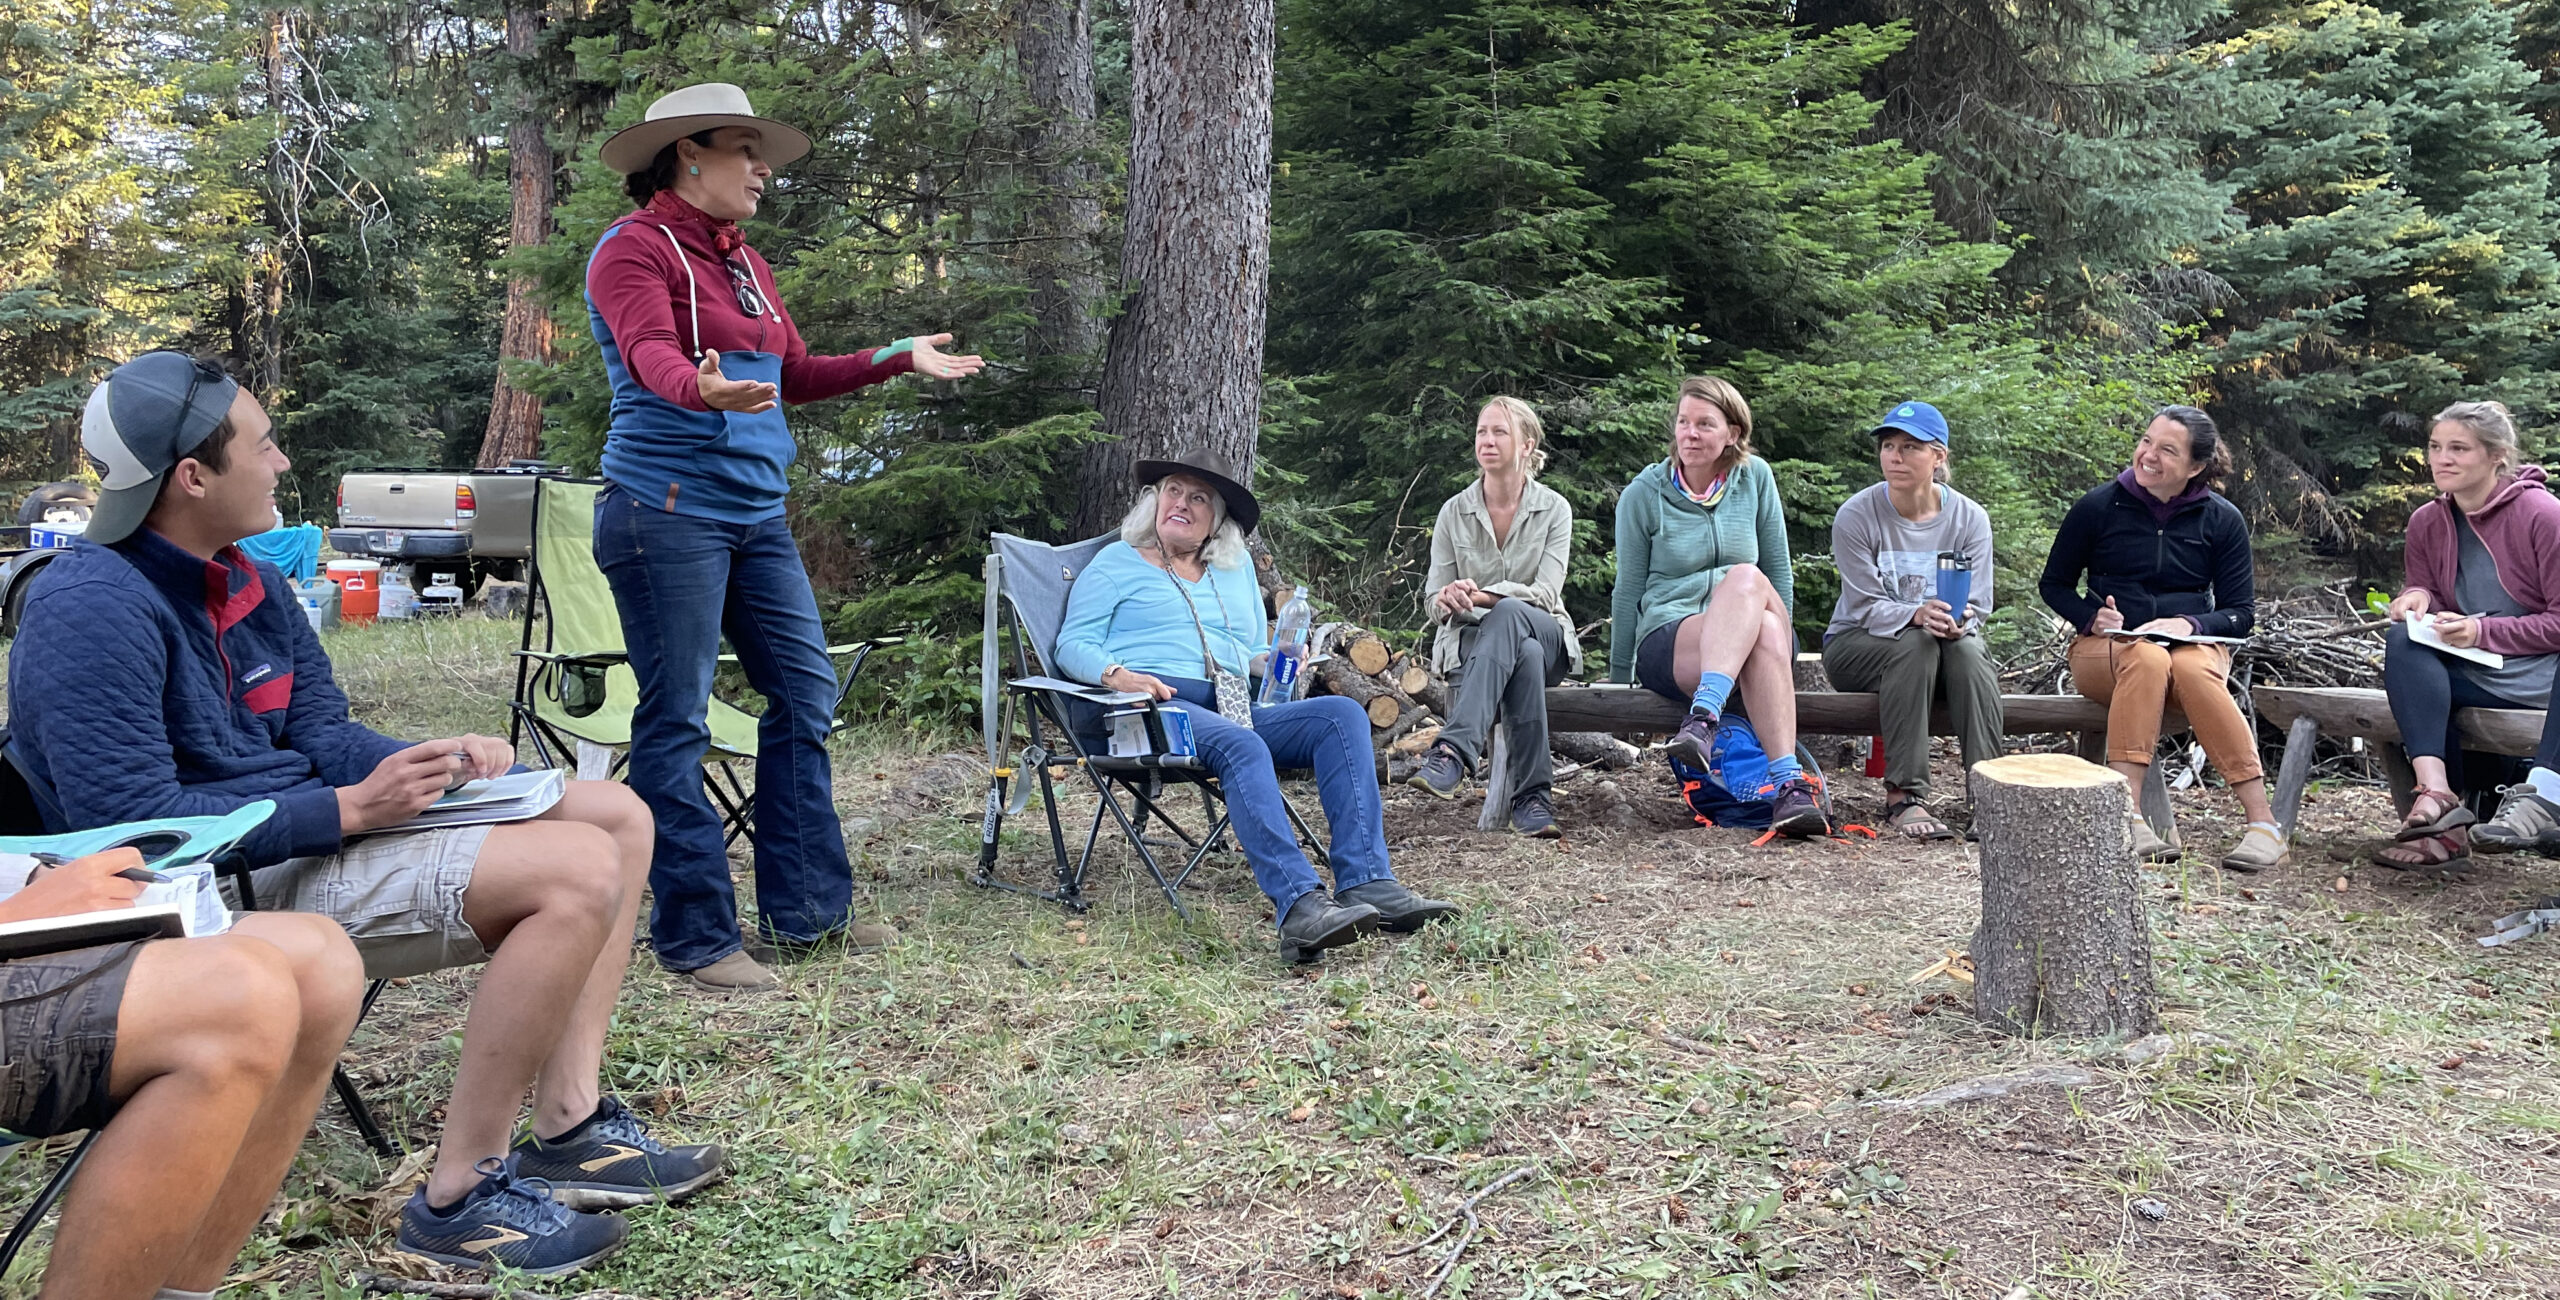 Students and instructors share what they've learned at an environmentally themed excursion near Cascade, Idaho.